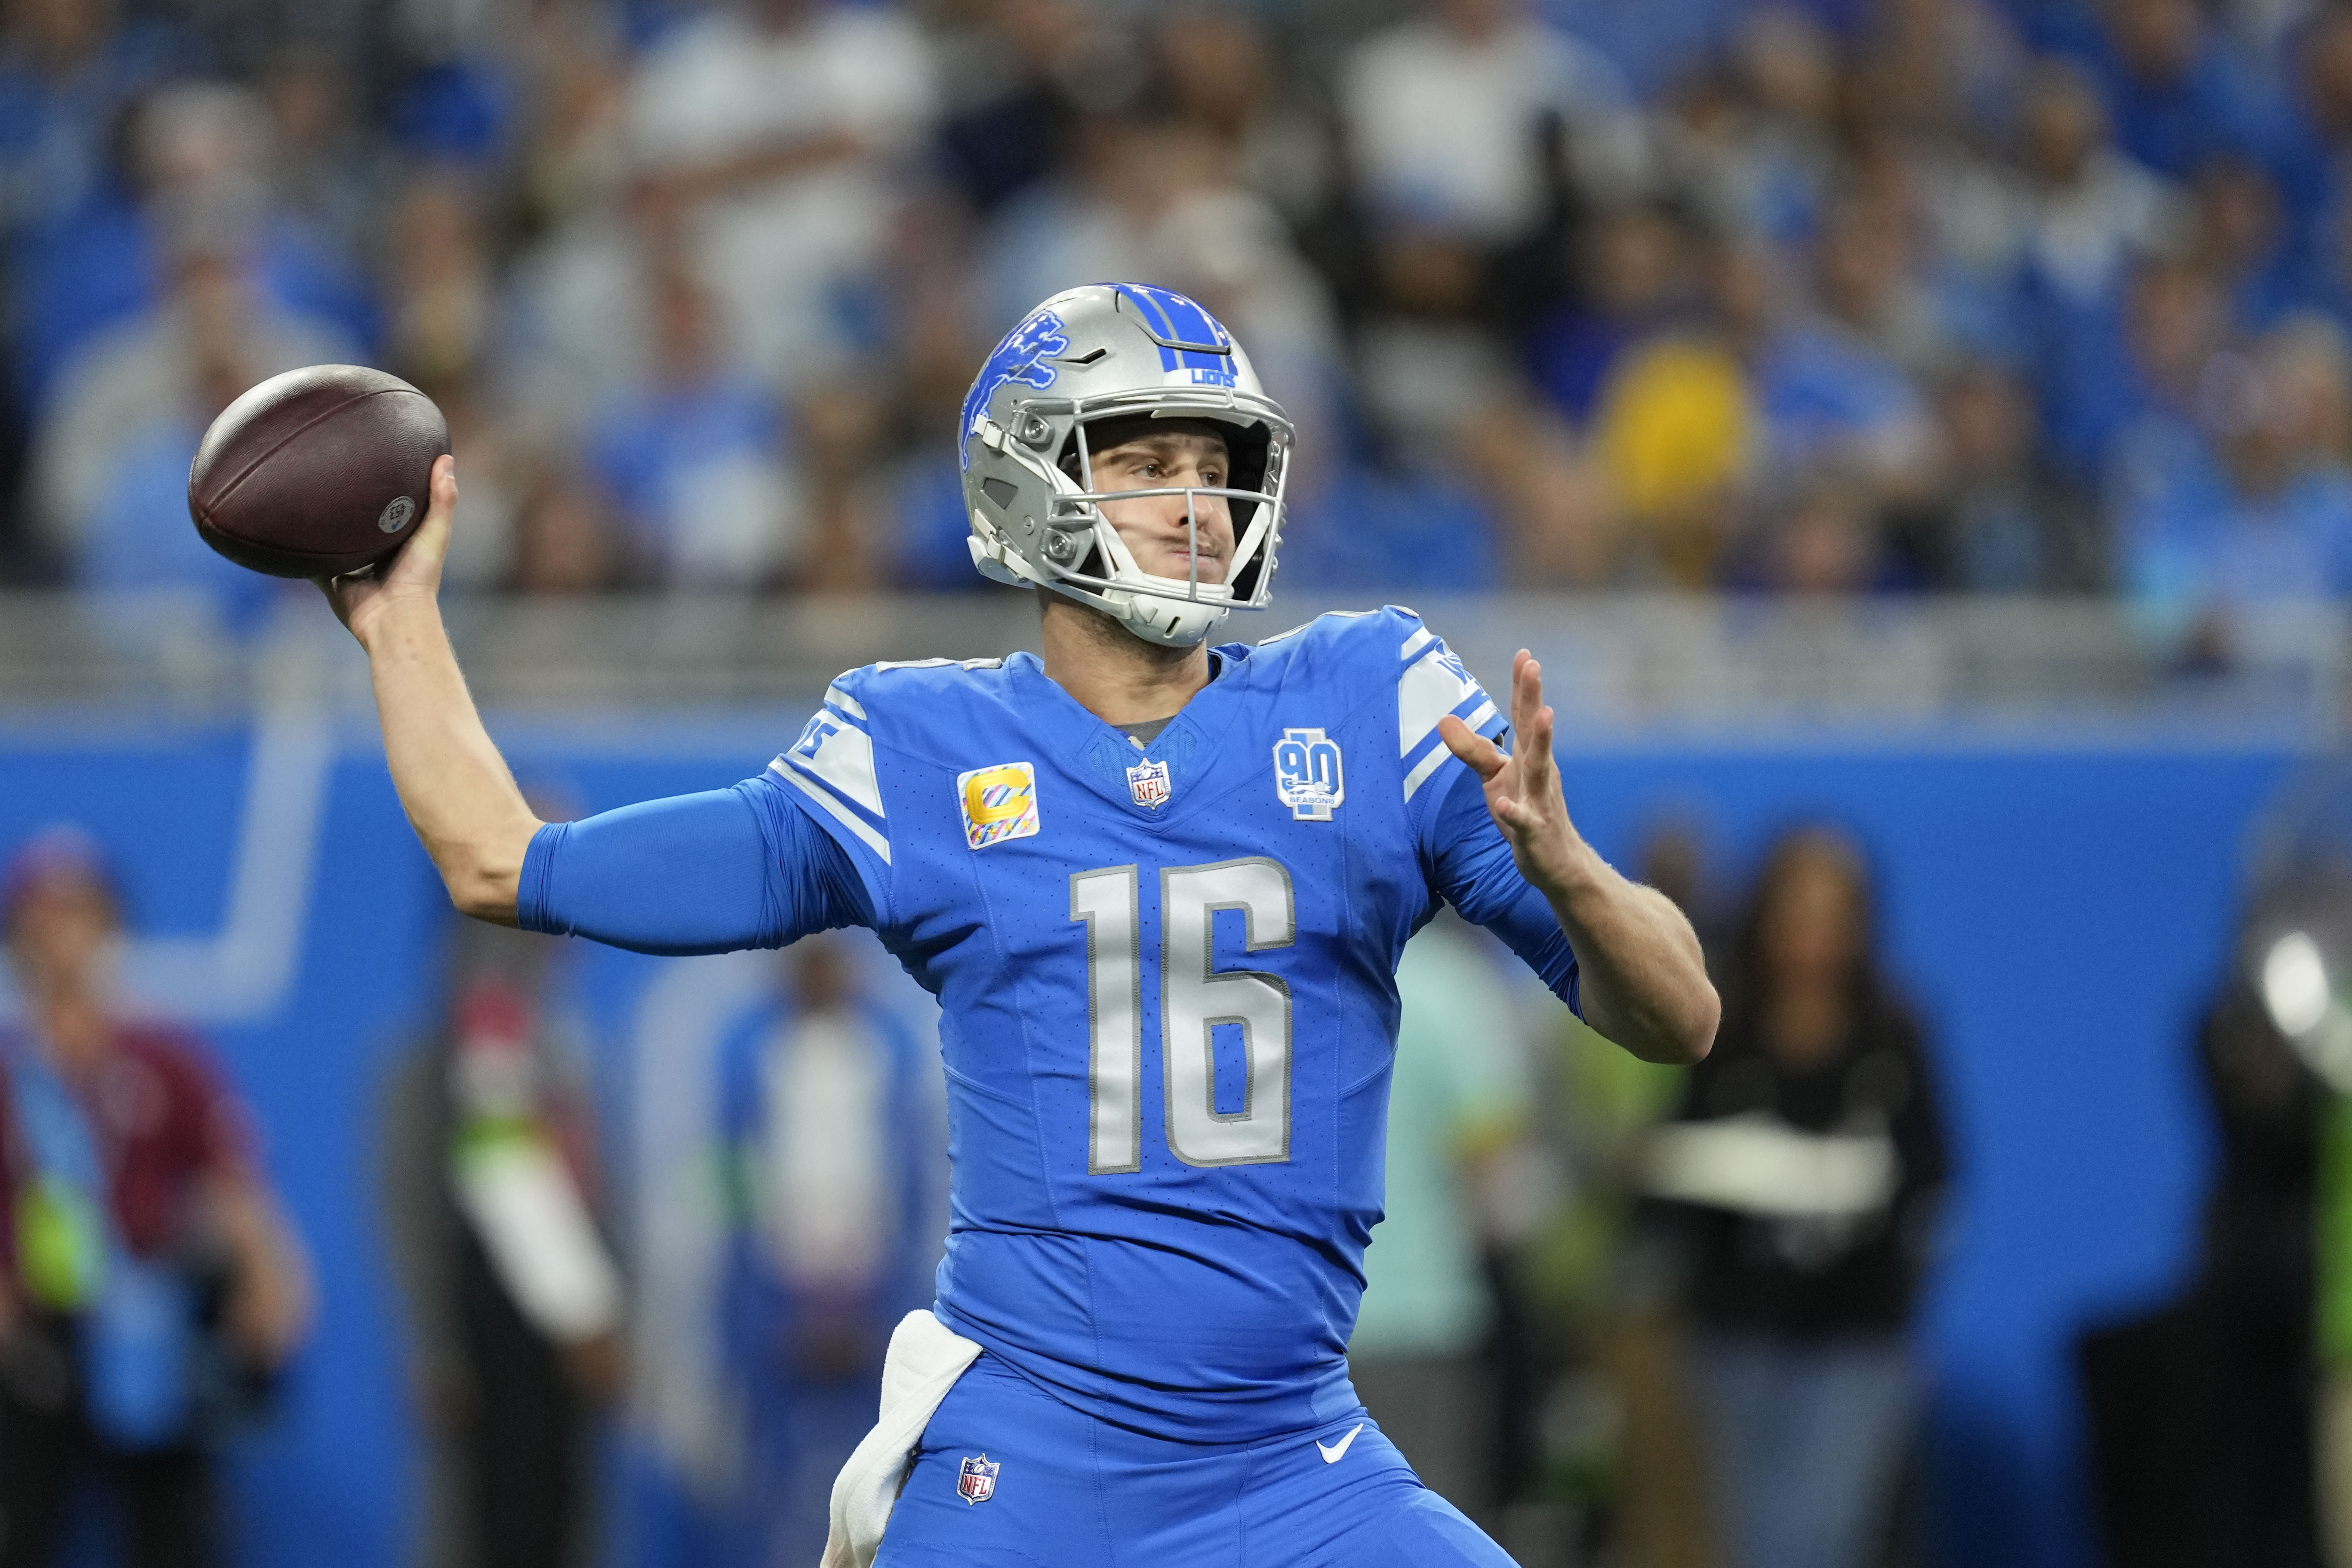 Jared Goff throws 3 TD passes, runs for score, NFC North-leading Lions beat  winless Panthers 42-24